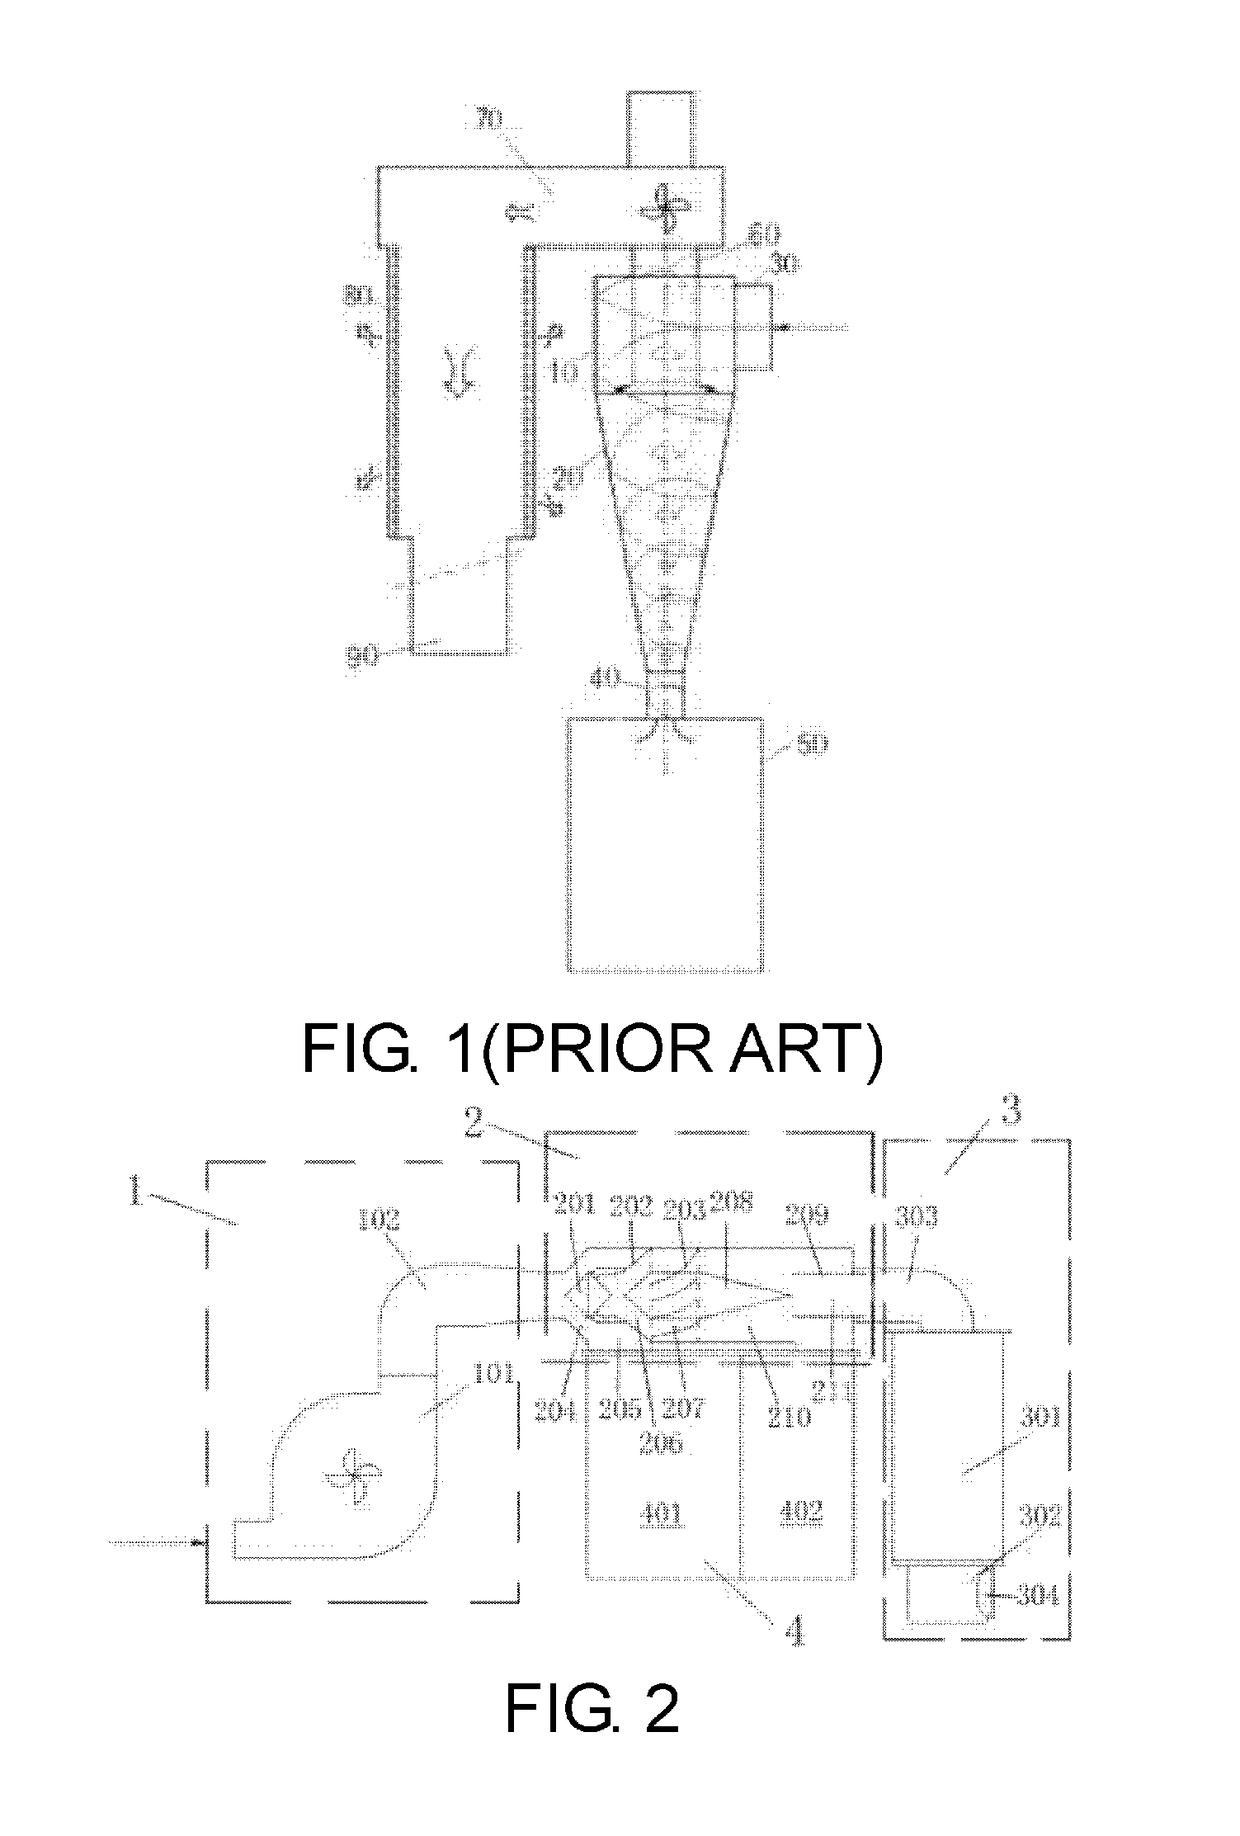 Dust separation apparatus and intelligent control system including the apparatus